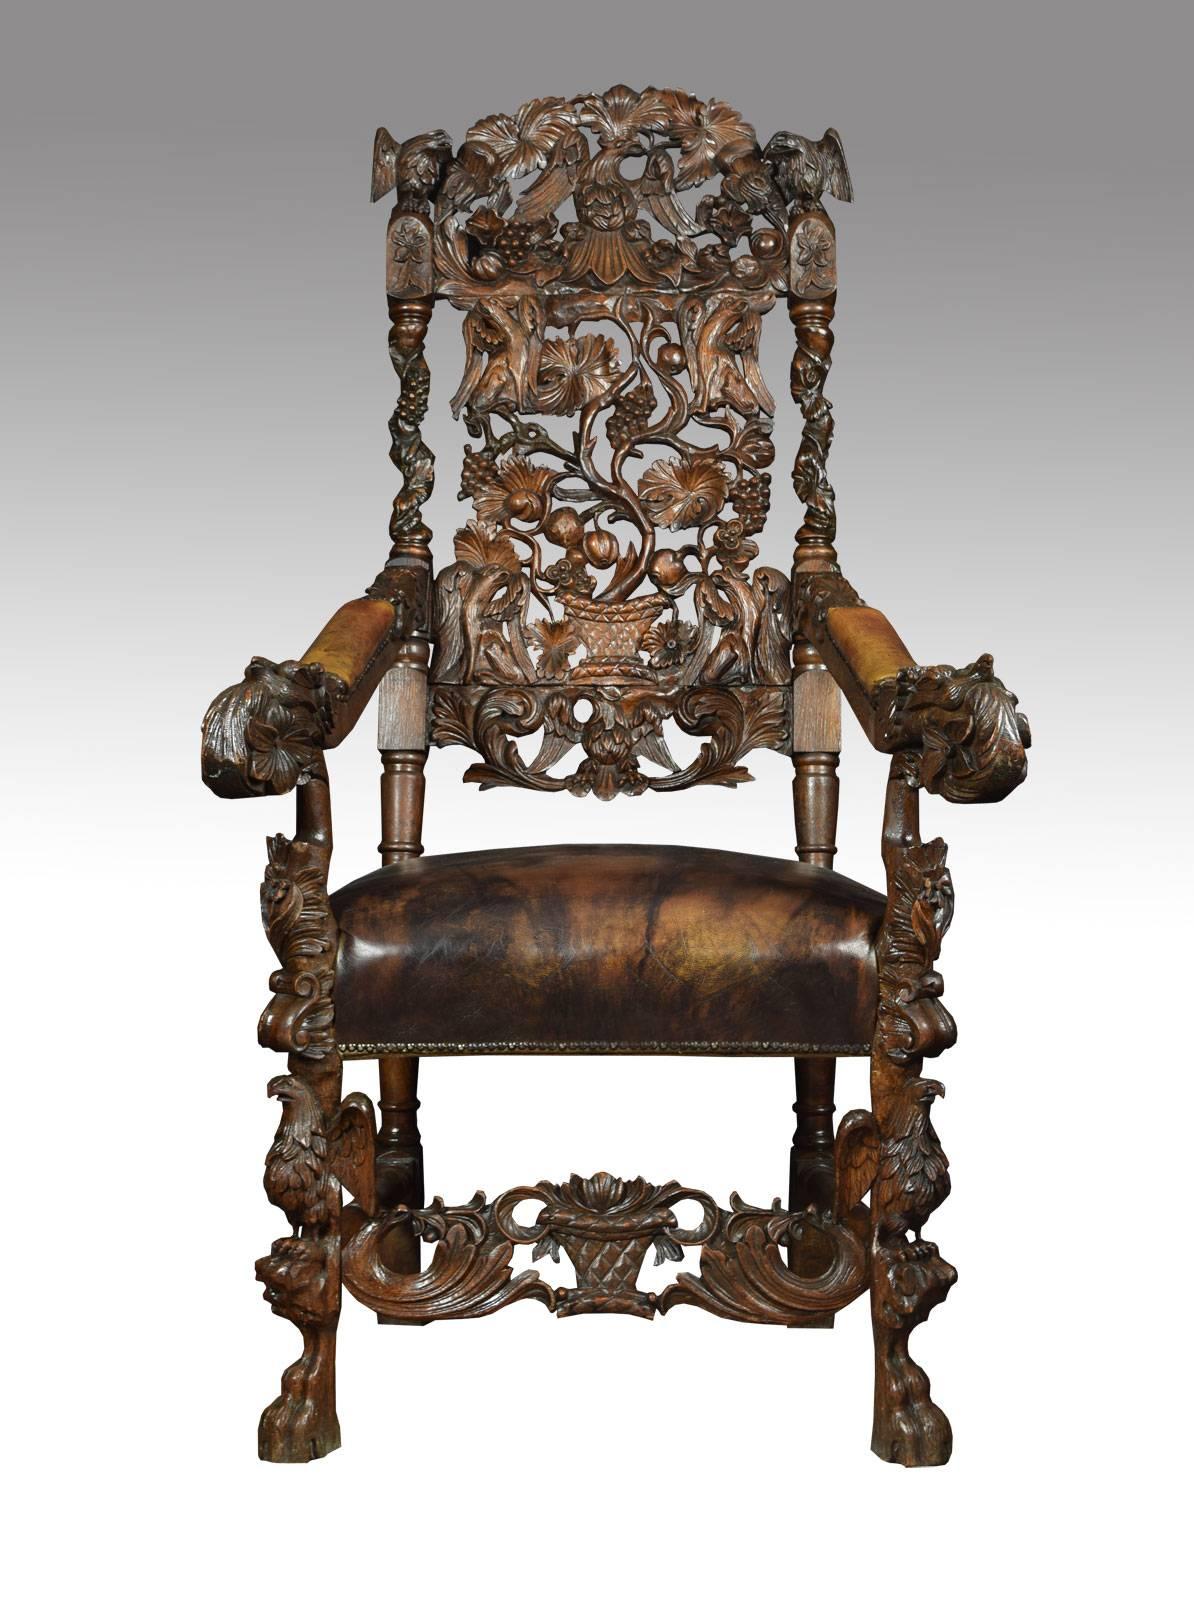 Monumental pair of Victorian carved oak armchairs, in Black Forest style, each with a carved eagle and grape and vine pierced panel back, out-curved leather arms and overstuffed seat raised on heavily carved front legs terminating in paw feet united